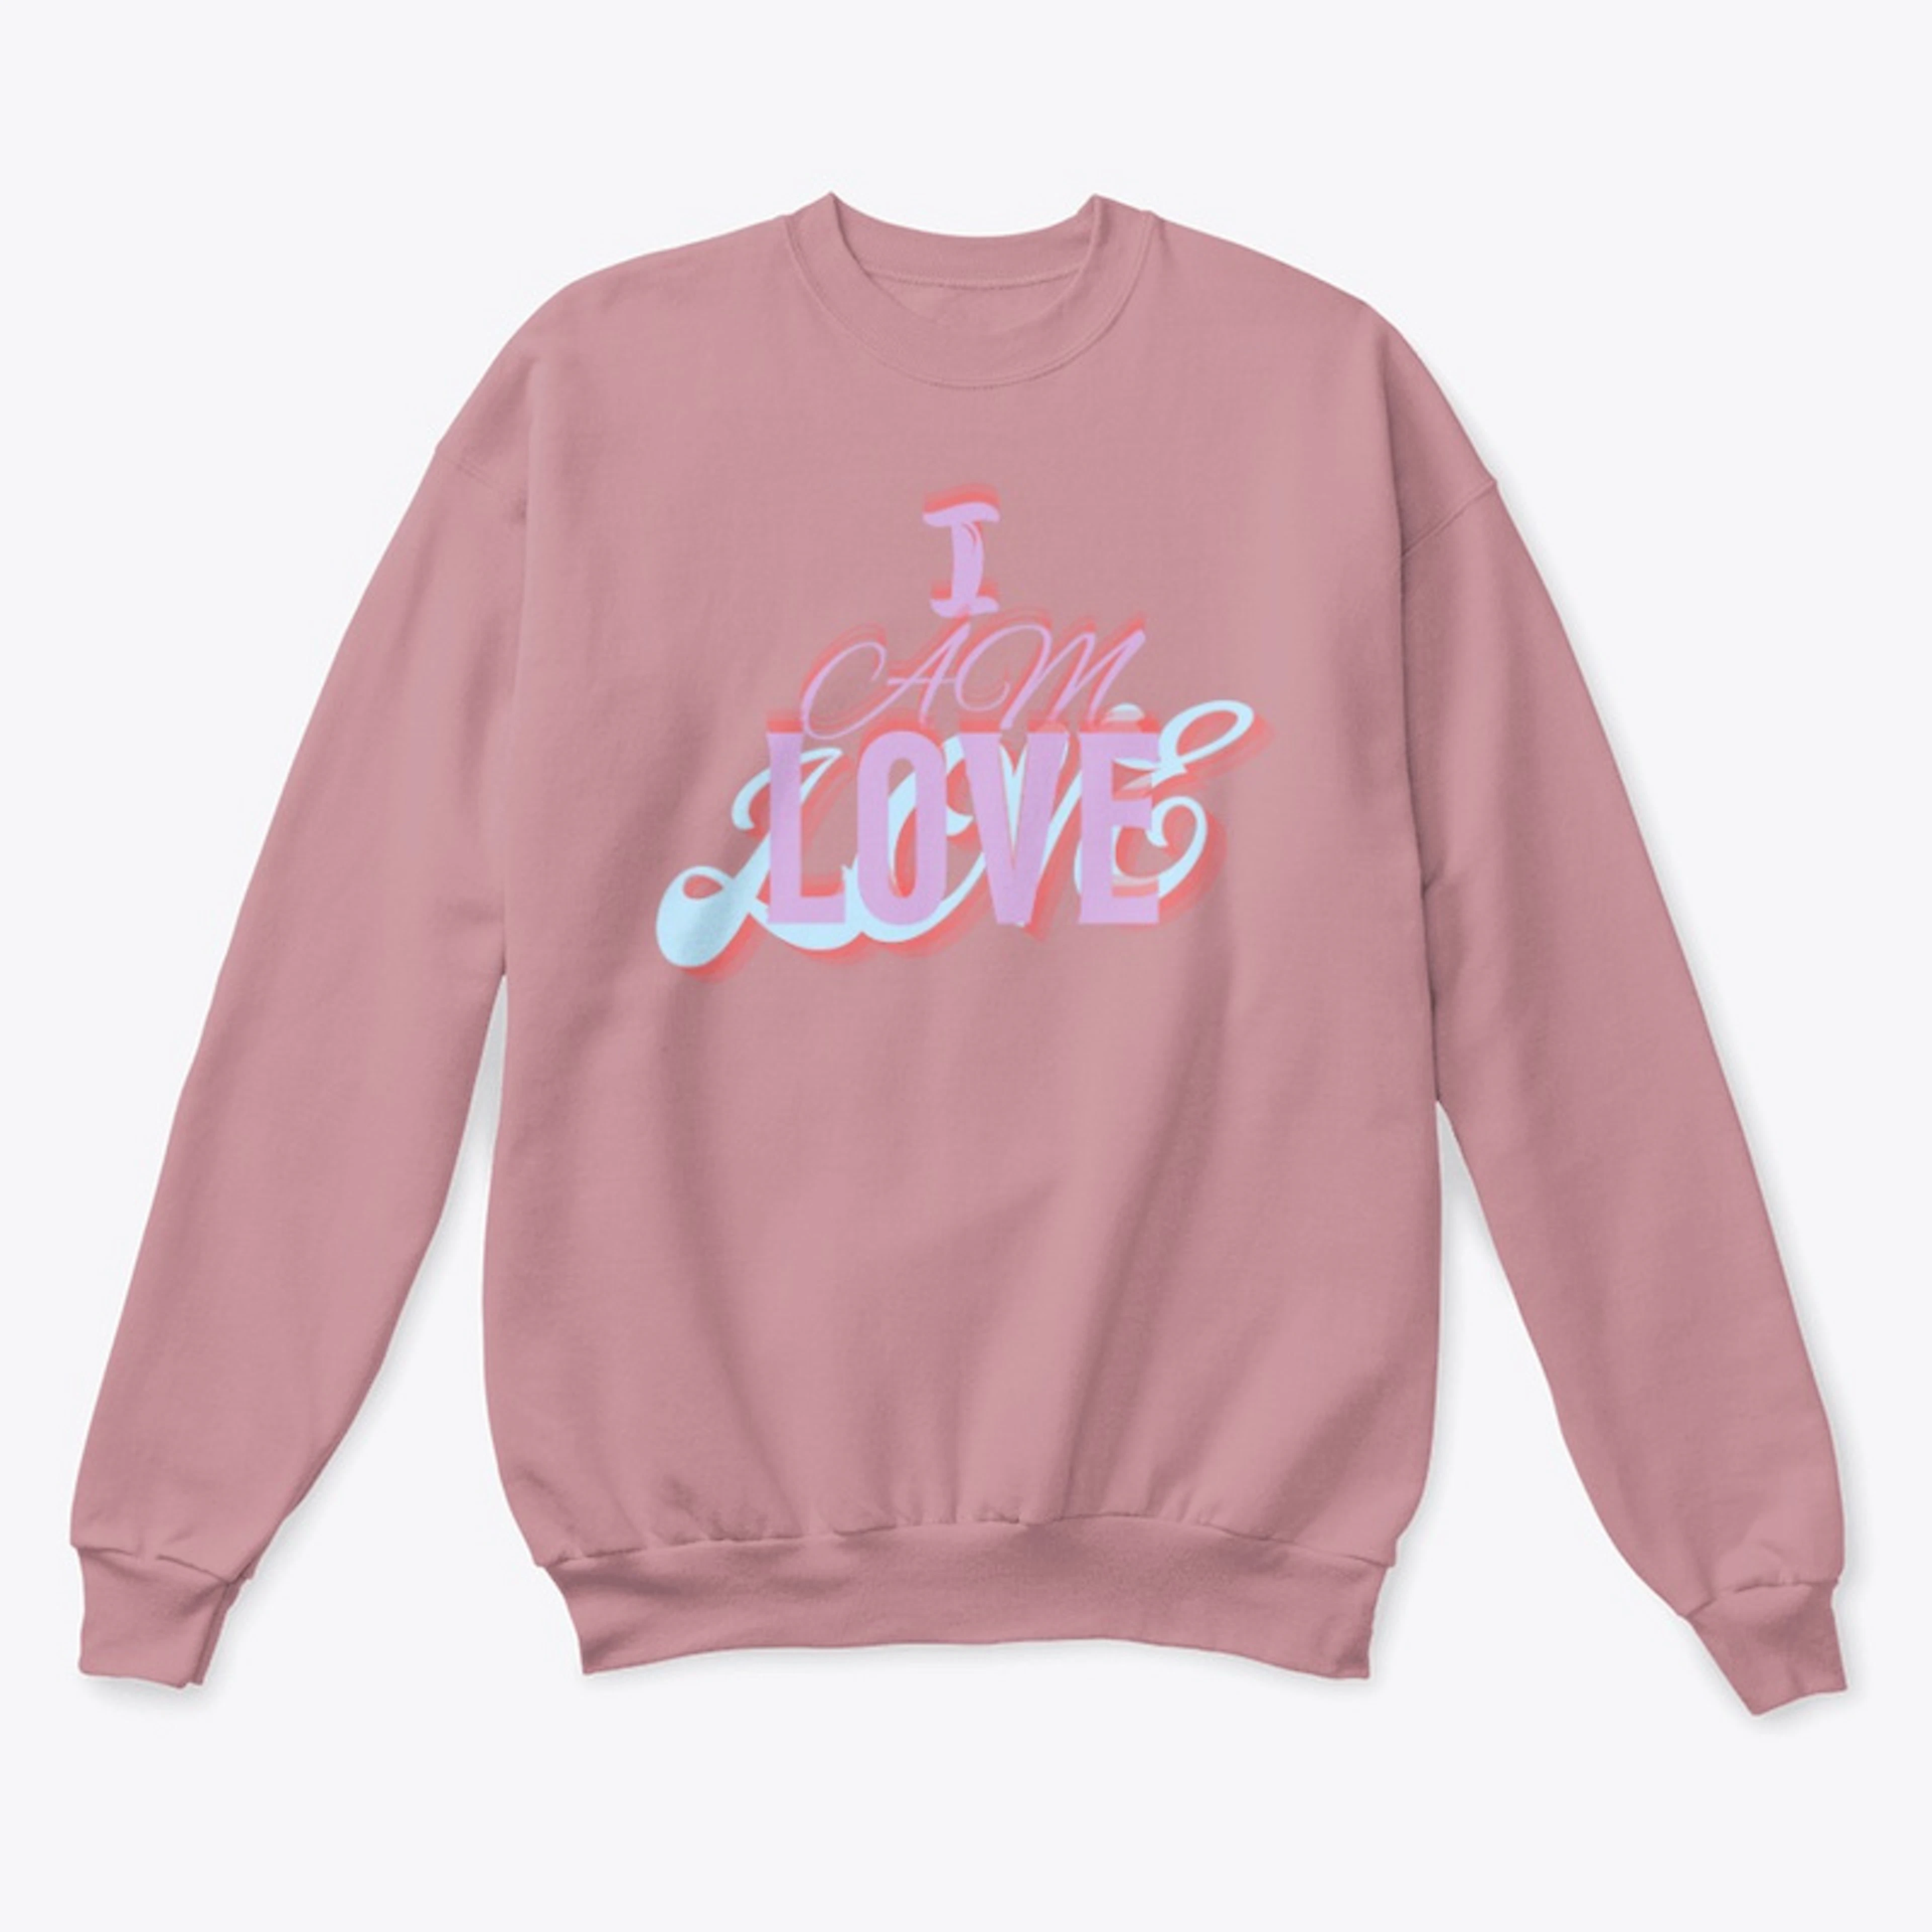 "I AM LOVE" Lilac letters